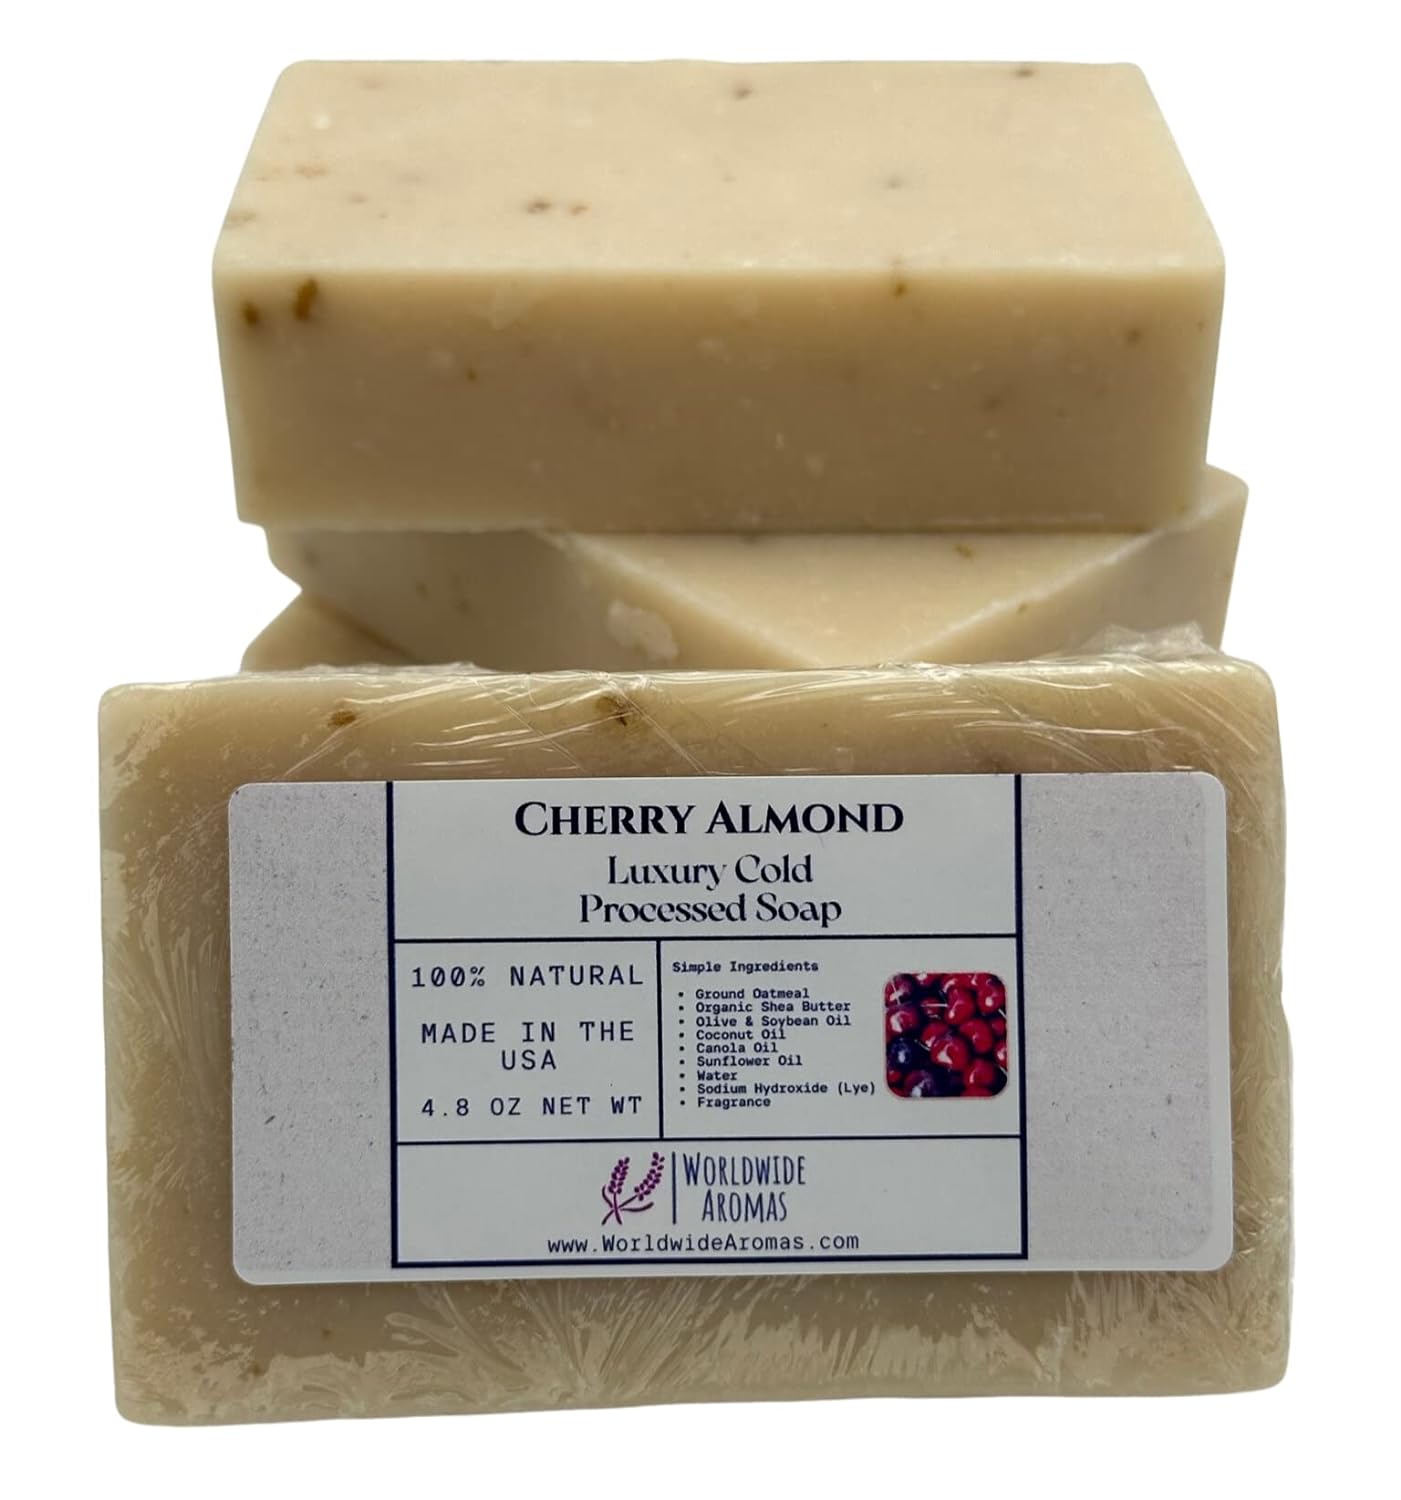 Worldwide Aromas Cherry and Almond Handmade Soap Bar with Exfoliating Ground Oatmeal and Nourishing Oils Ideal for Body, Hand, and Face - Sulfate and Paraben-Free, Cold Processed Soap